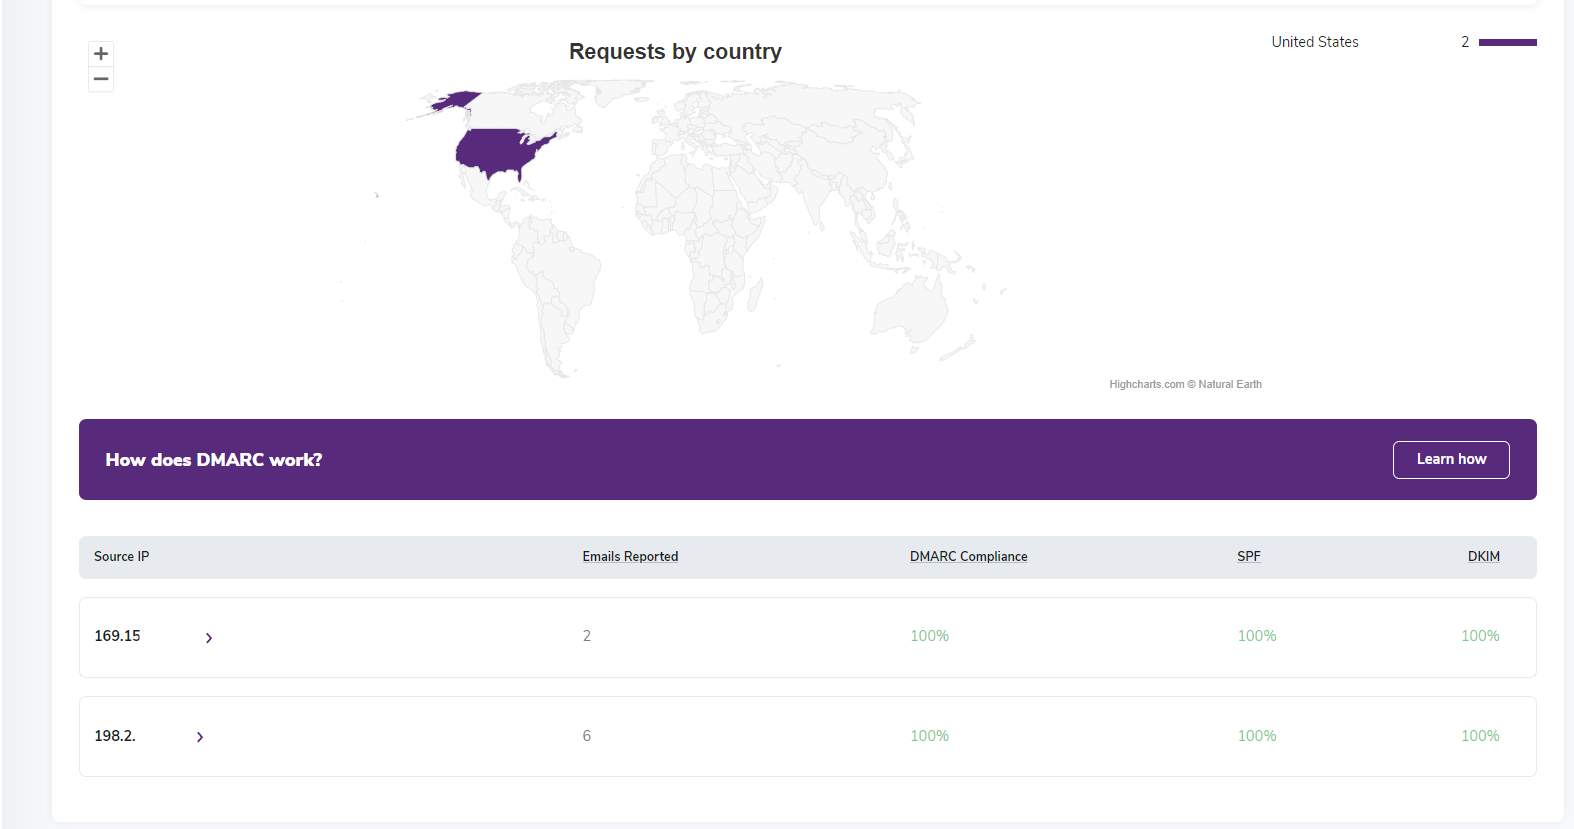 DMARC monitor Country Statistics